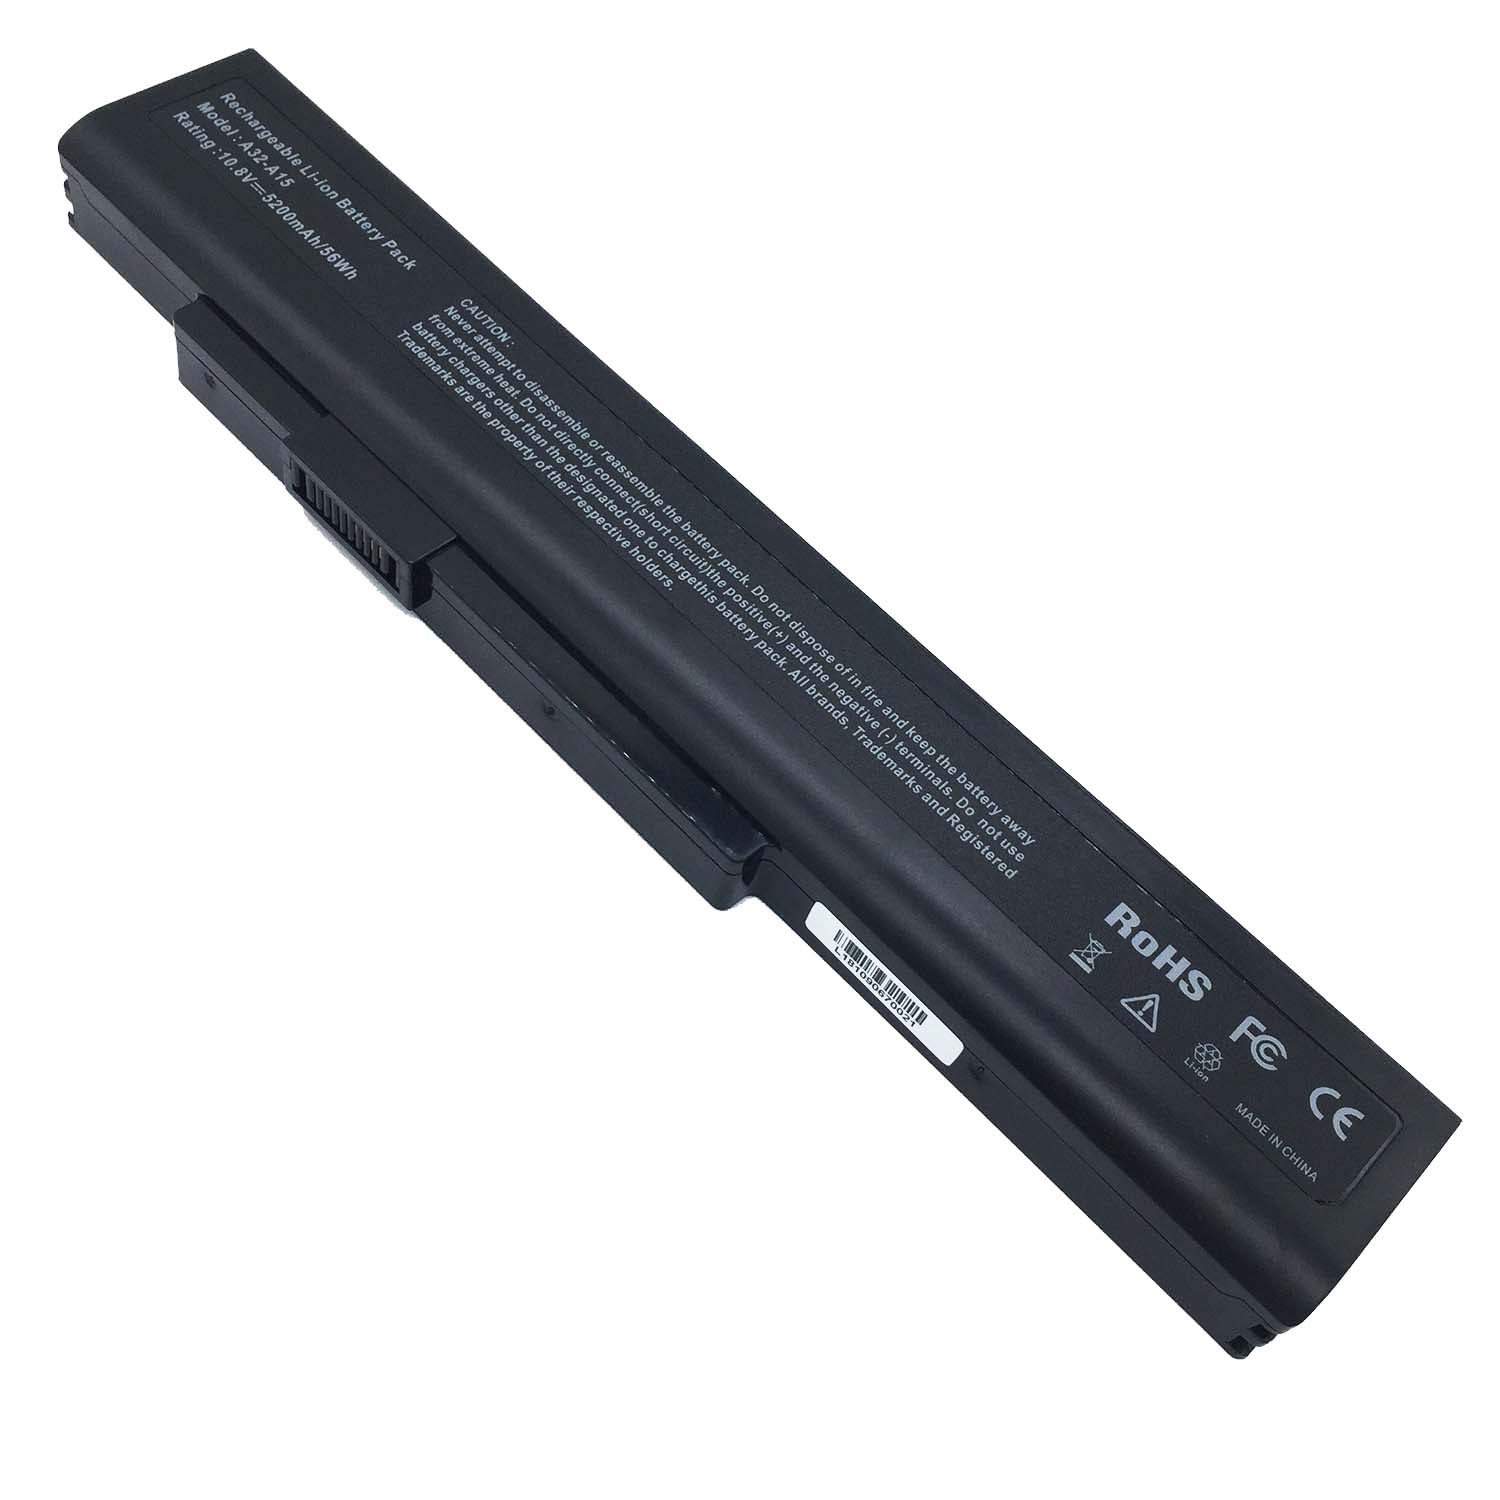 Replacement Battery for Medion Medion Akoya P6815 battery